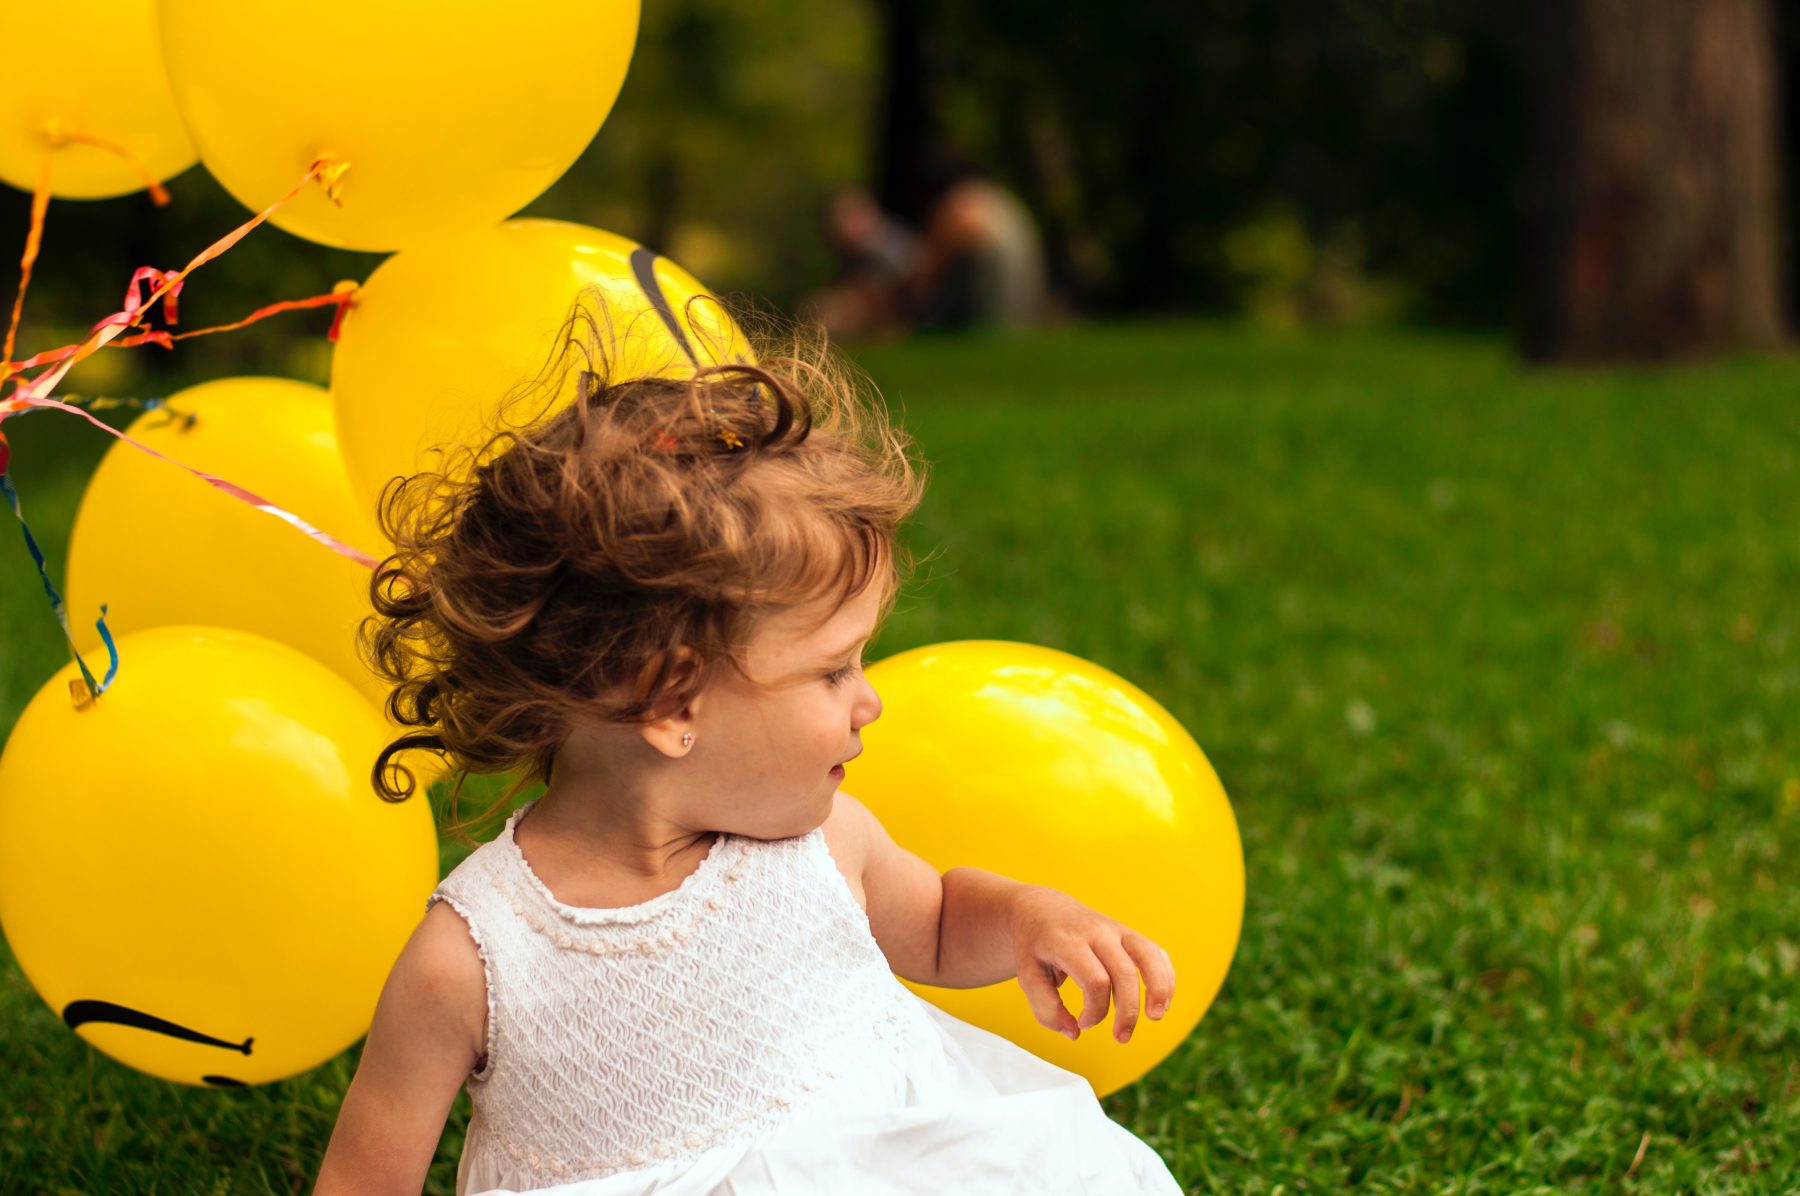 A child sitting on grass with yellow balloons behind.